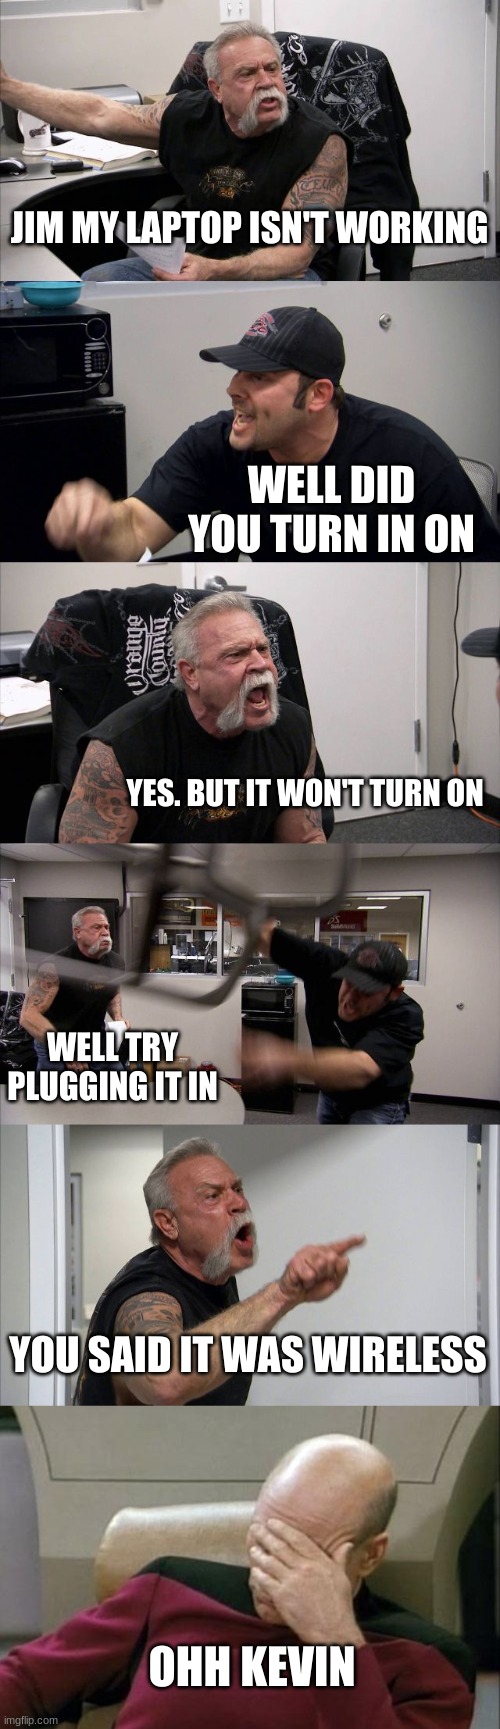 Cobra Kai | JIM MY LAPTOP ISN'T WORKING; WELL DID YOU TURN IN ON; YES. BUT IT WON'T TURN ON; WELL TRY PLUGGING IT IN; YOU SAID IT WAS WIRELESS; OHH KEVIN | image tagged in memes,american chopper argument,captain picard facepalm | made w/ Imgflip meme maker